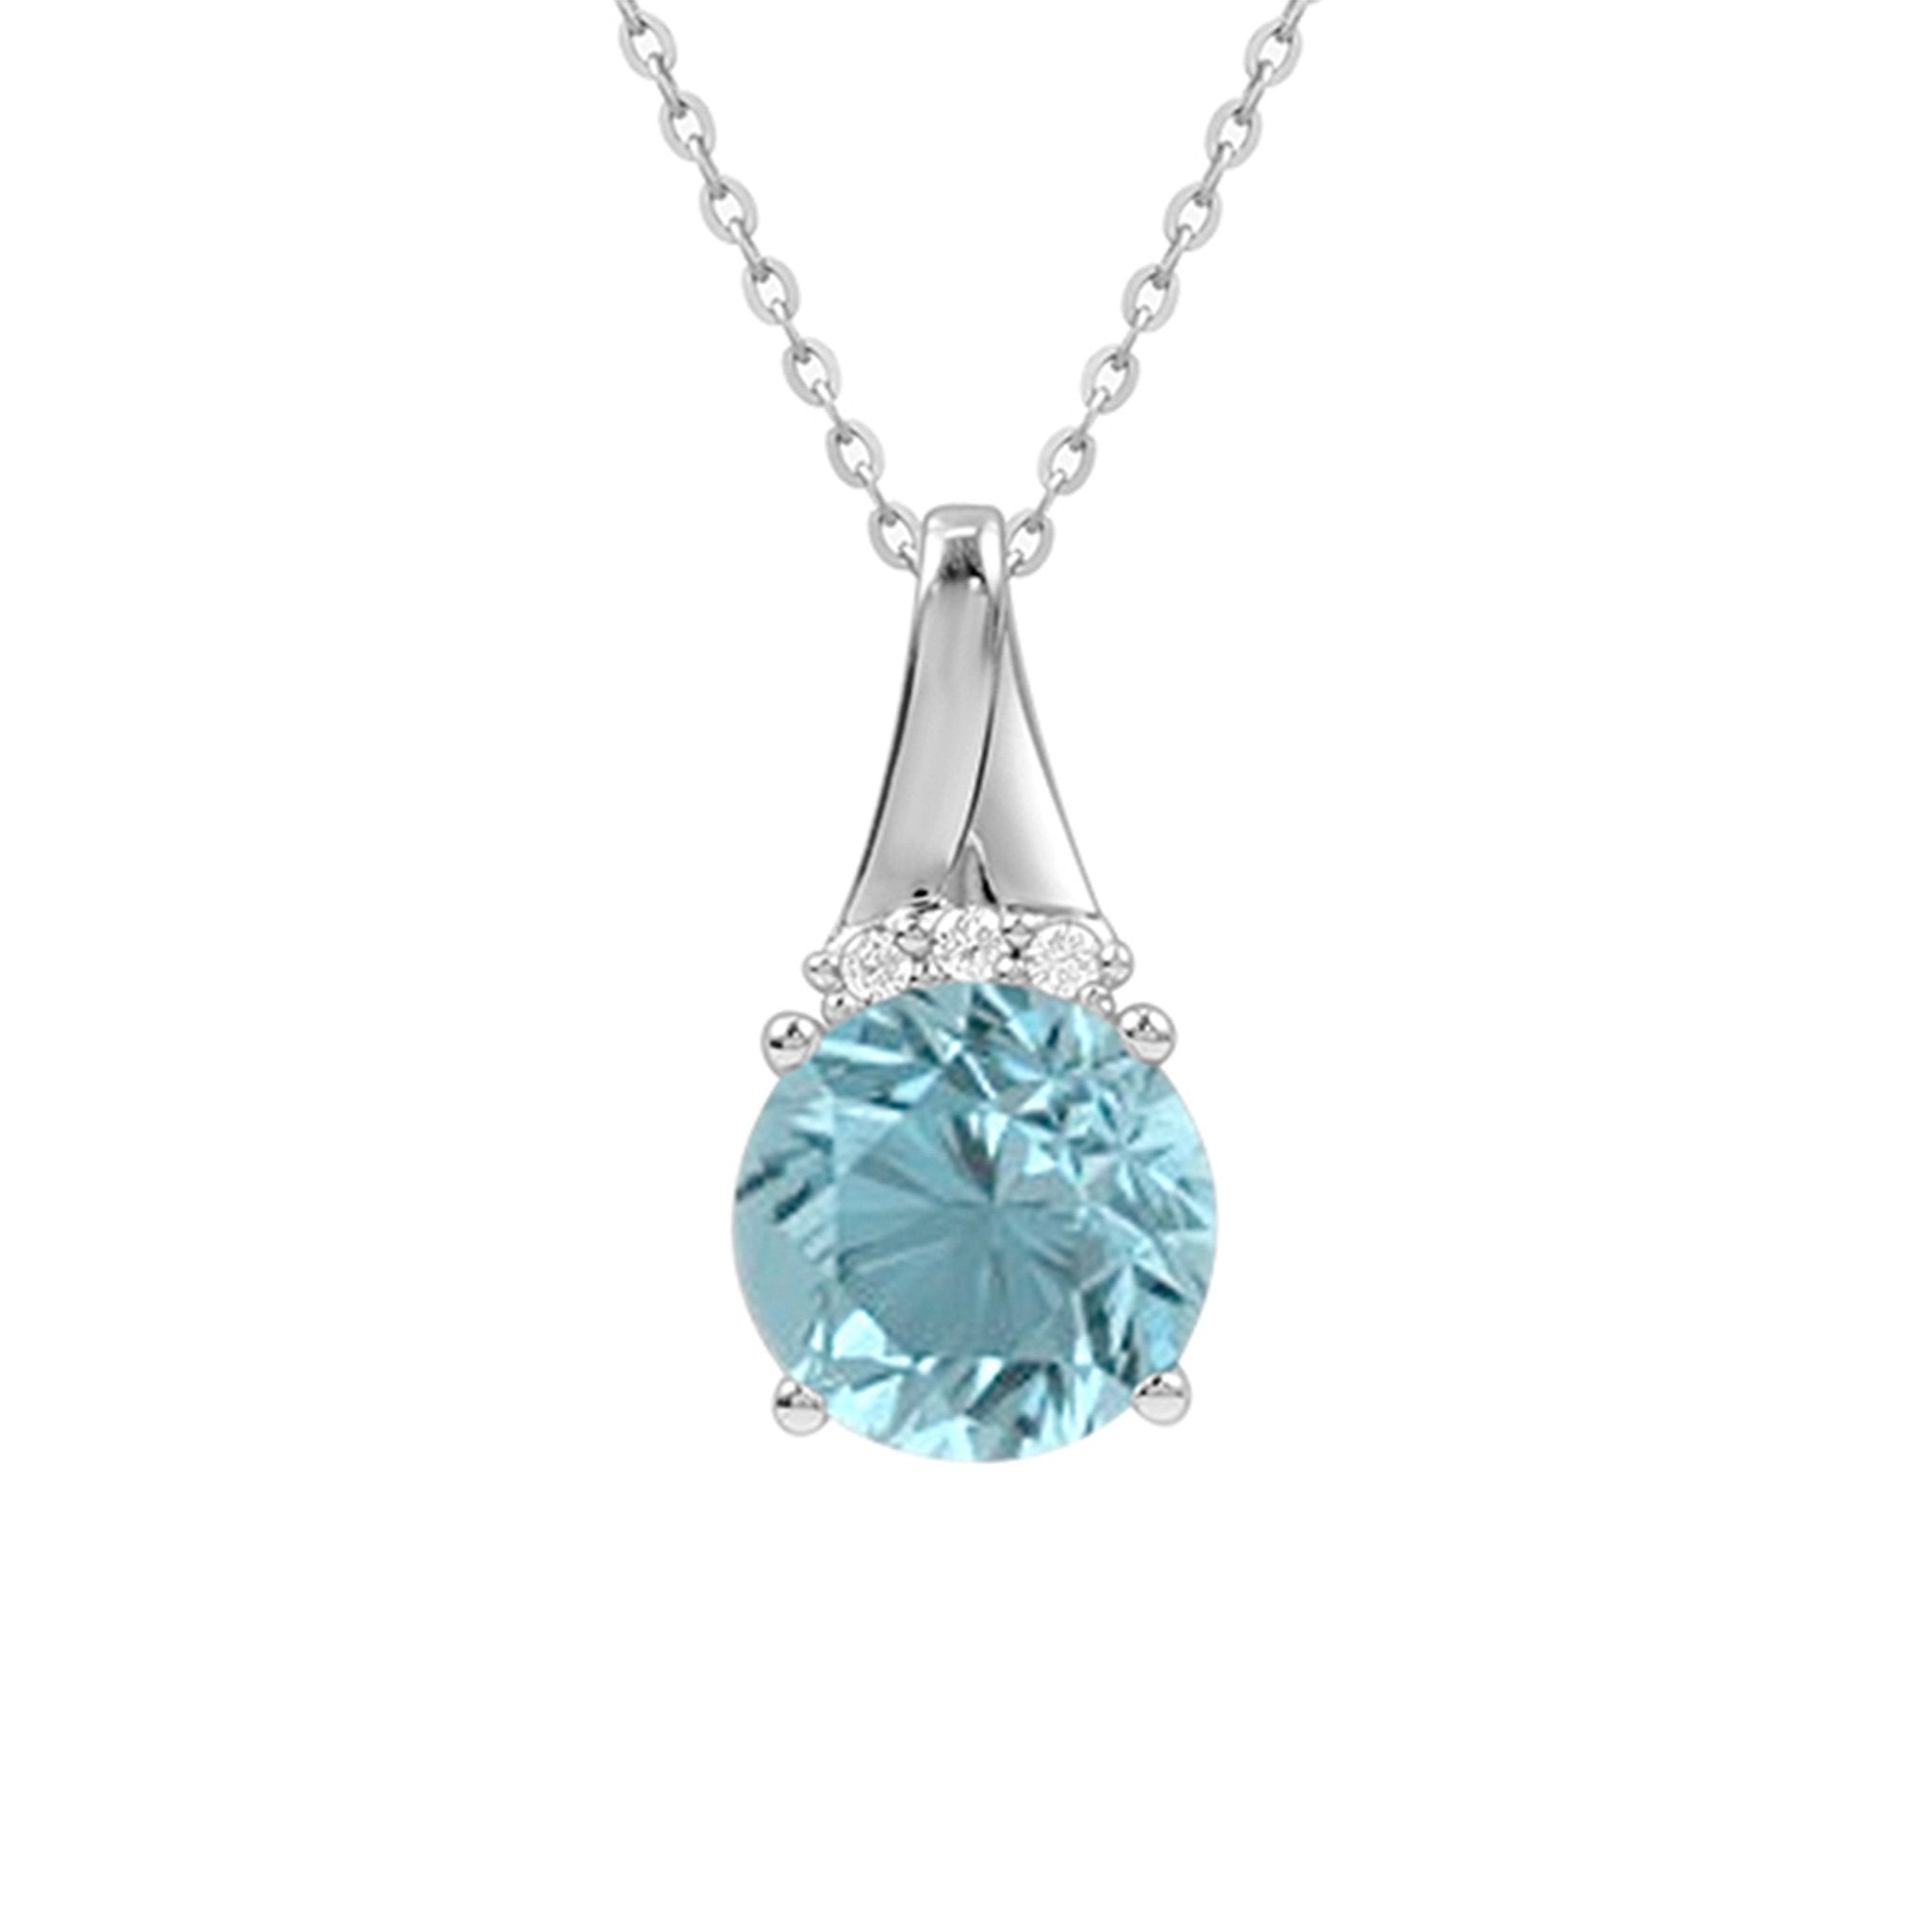 Round Blue Topaz Pendant Necklace with Diamonds Necklaces Estella Collection #product_description# 14k Birthstone Blue Gemstone #tag4# #tag5# #tag6# #tag7# #tag8# #tag9# #tag10#